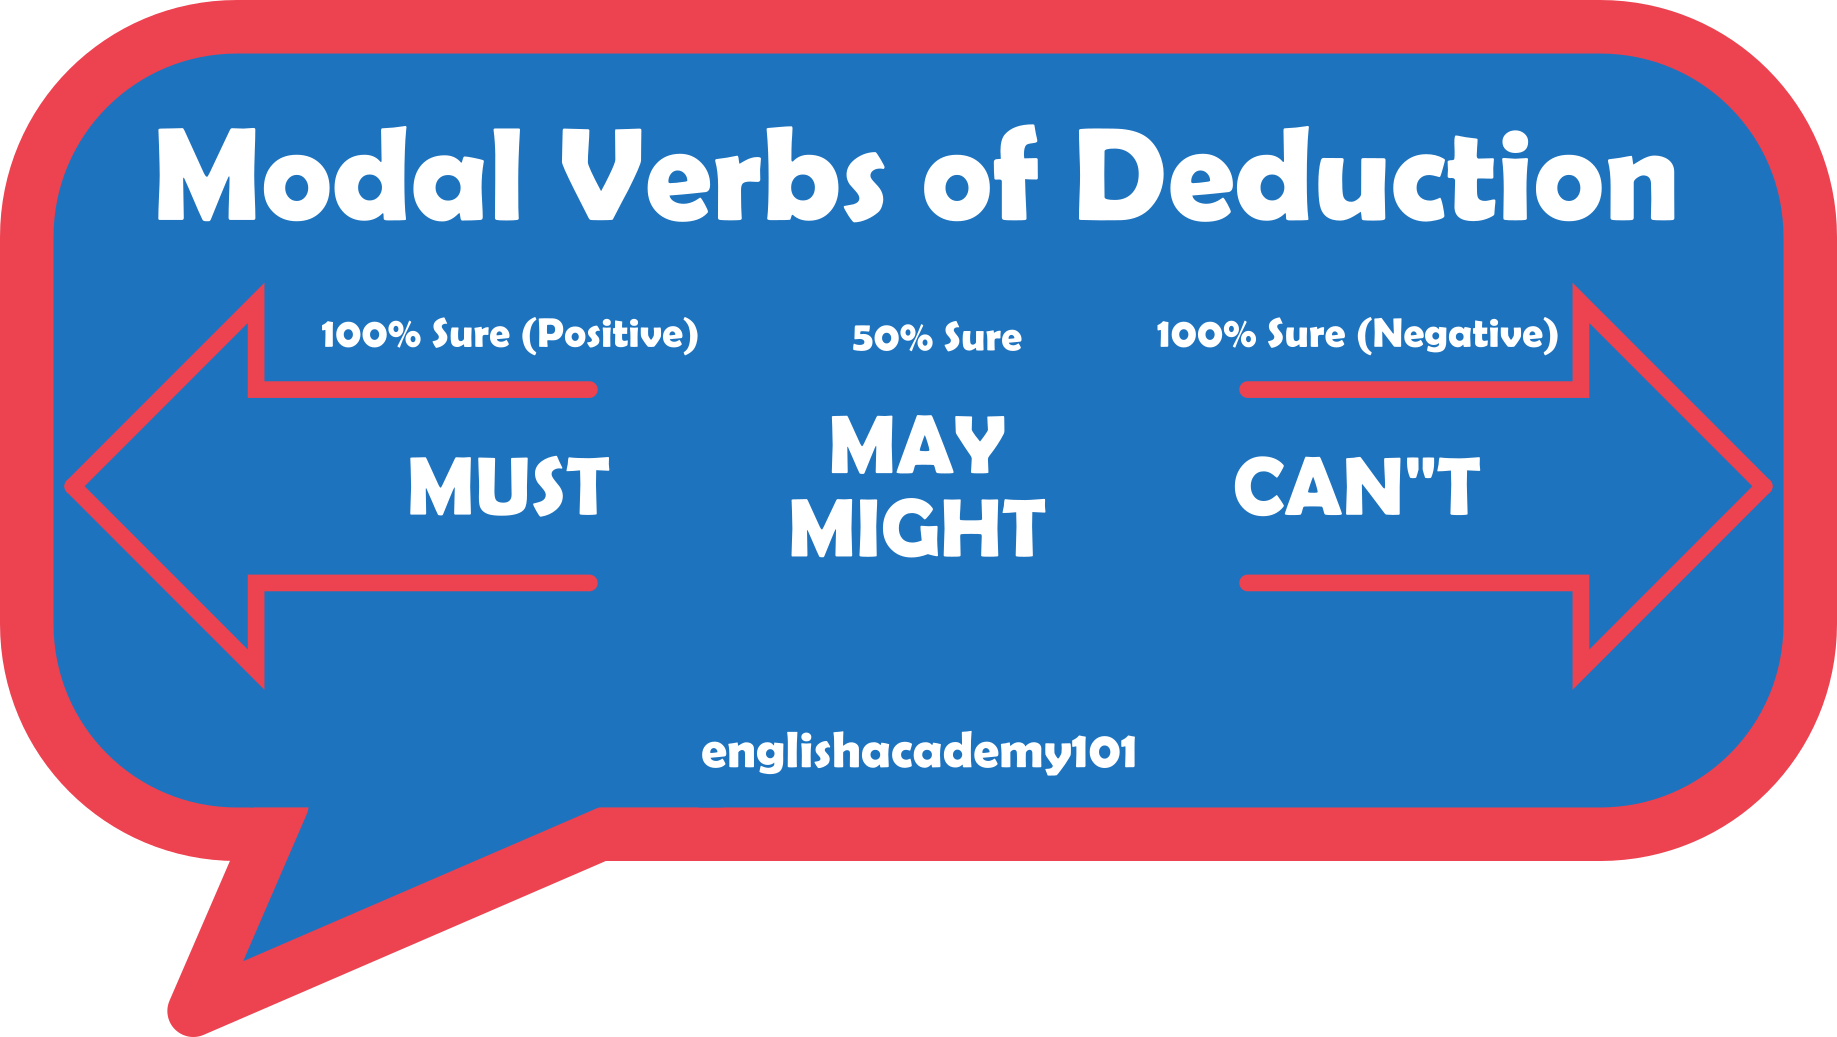 modal-verbs-of-deduction-must-can-t-may-might-englishacademy101